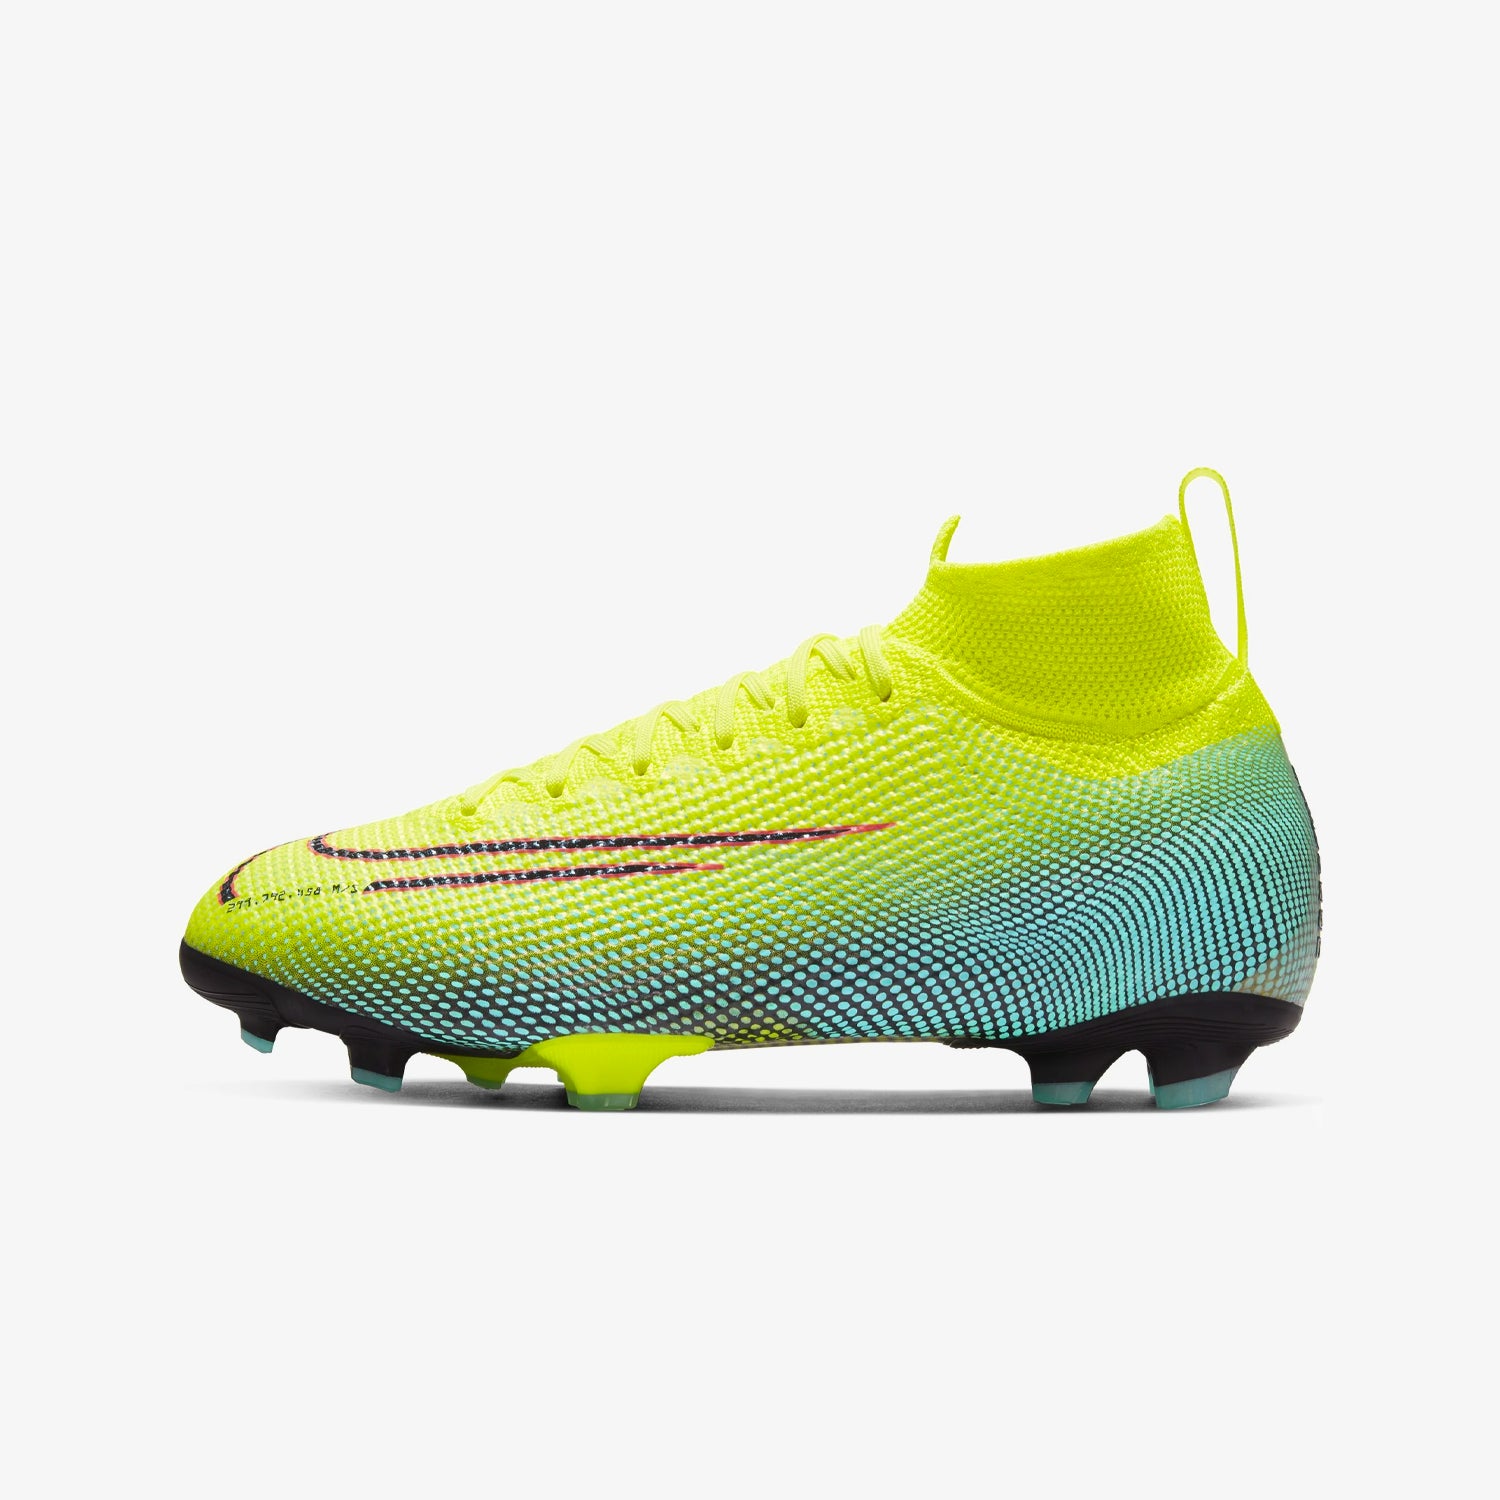 Jr. Mercurial Superfly 7 Elite MDS FG Big Kids' Firm-Ground Soccer Cleat